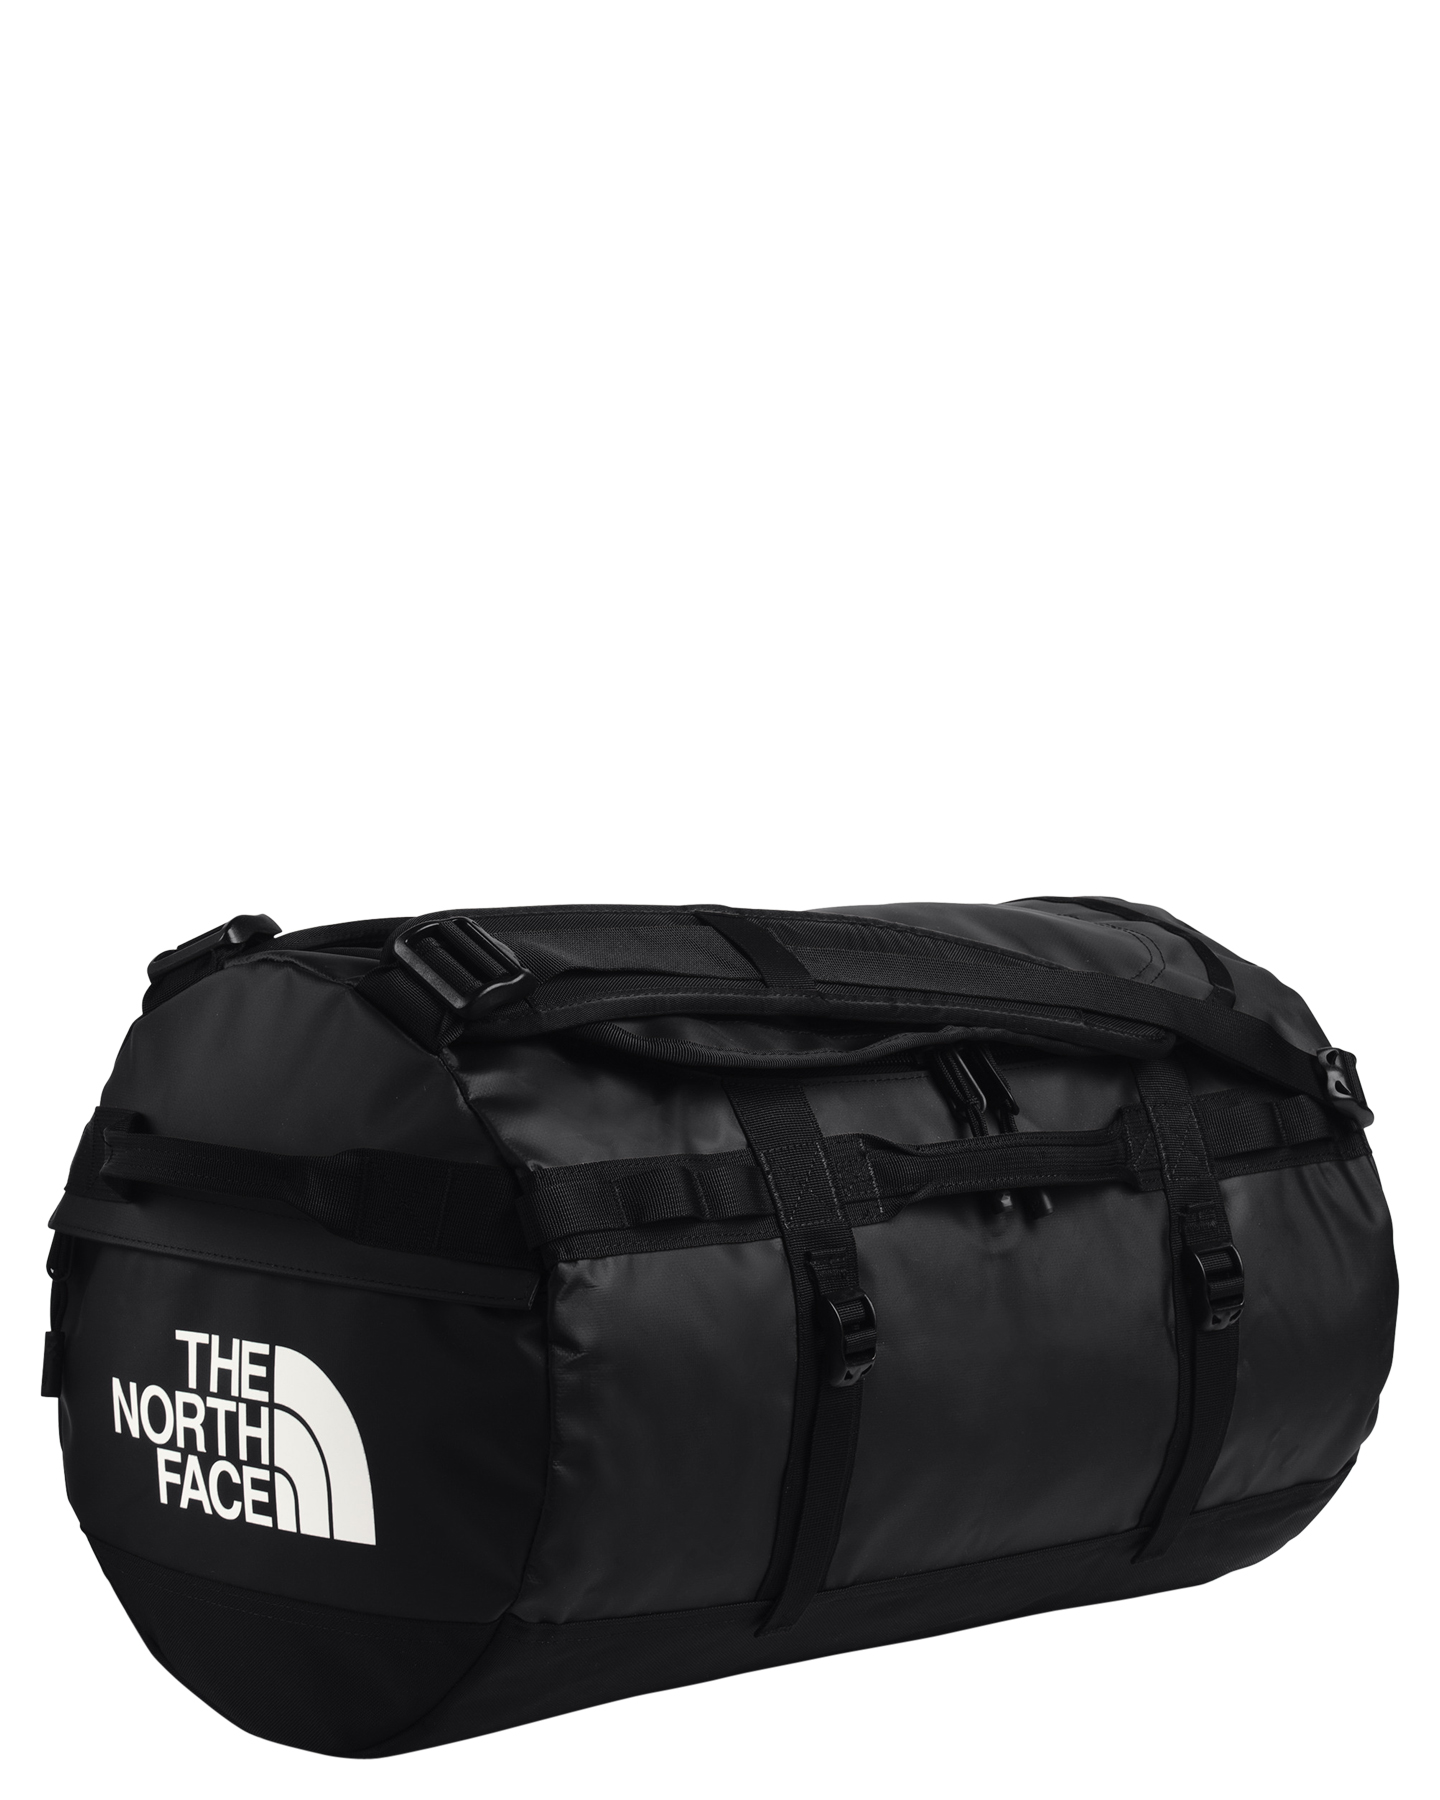 The North Face Base Camp S 50L Duffle Bag - Tnf Black | SurfStitch